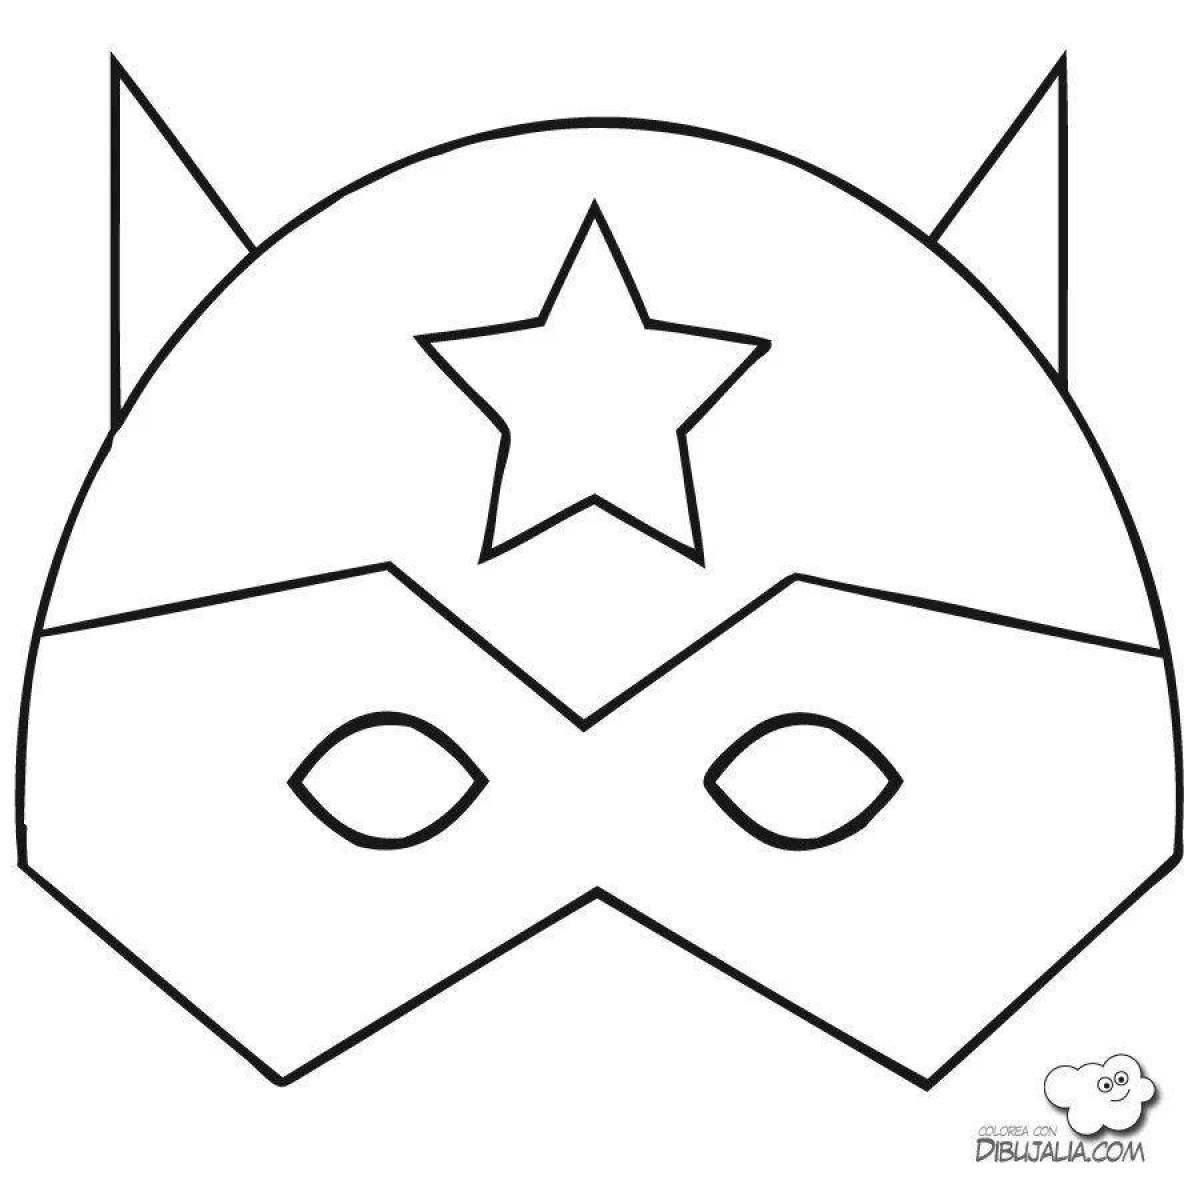 Great superhero mask coloring page